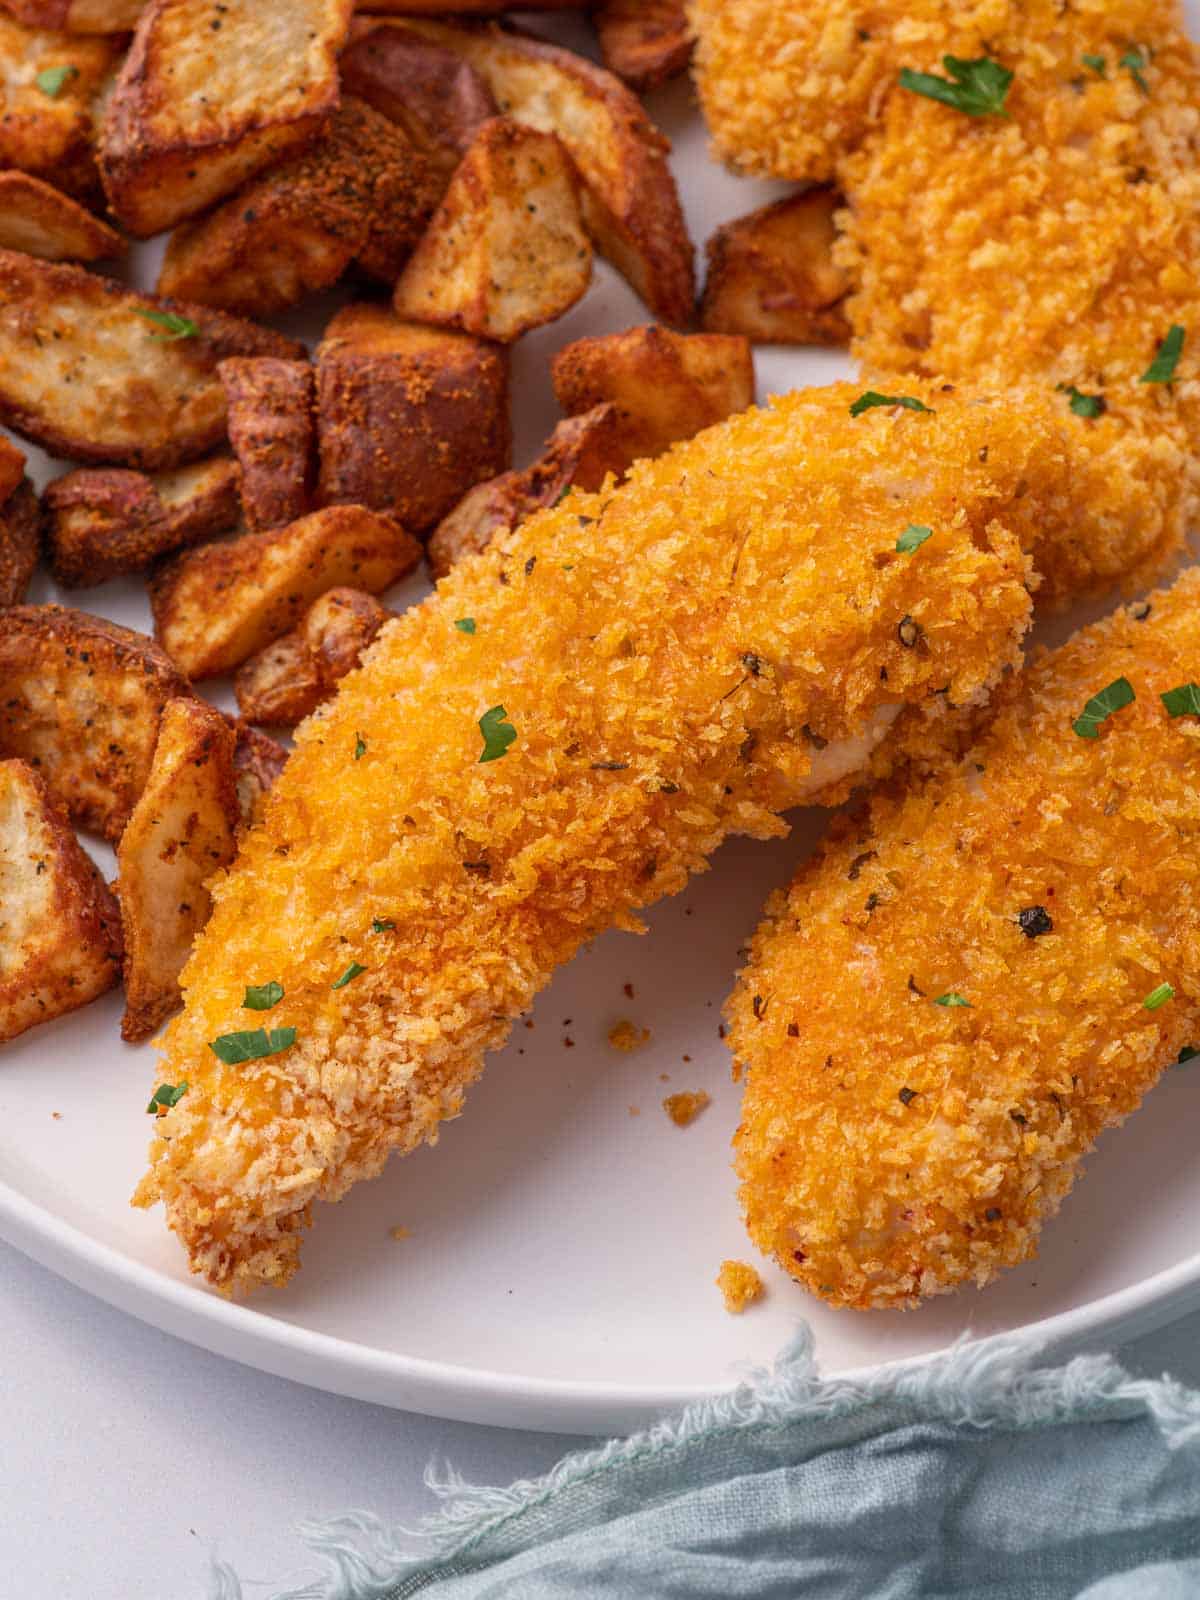 Crispy panko chicken on a plate with roasted potatoes.